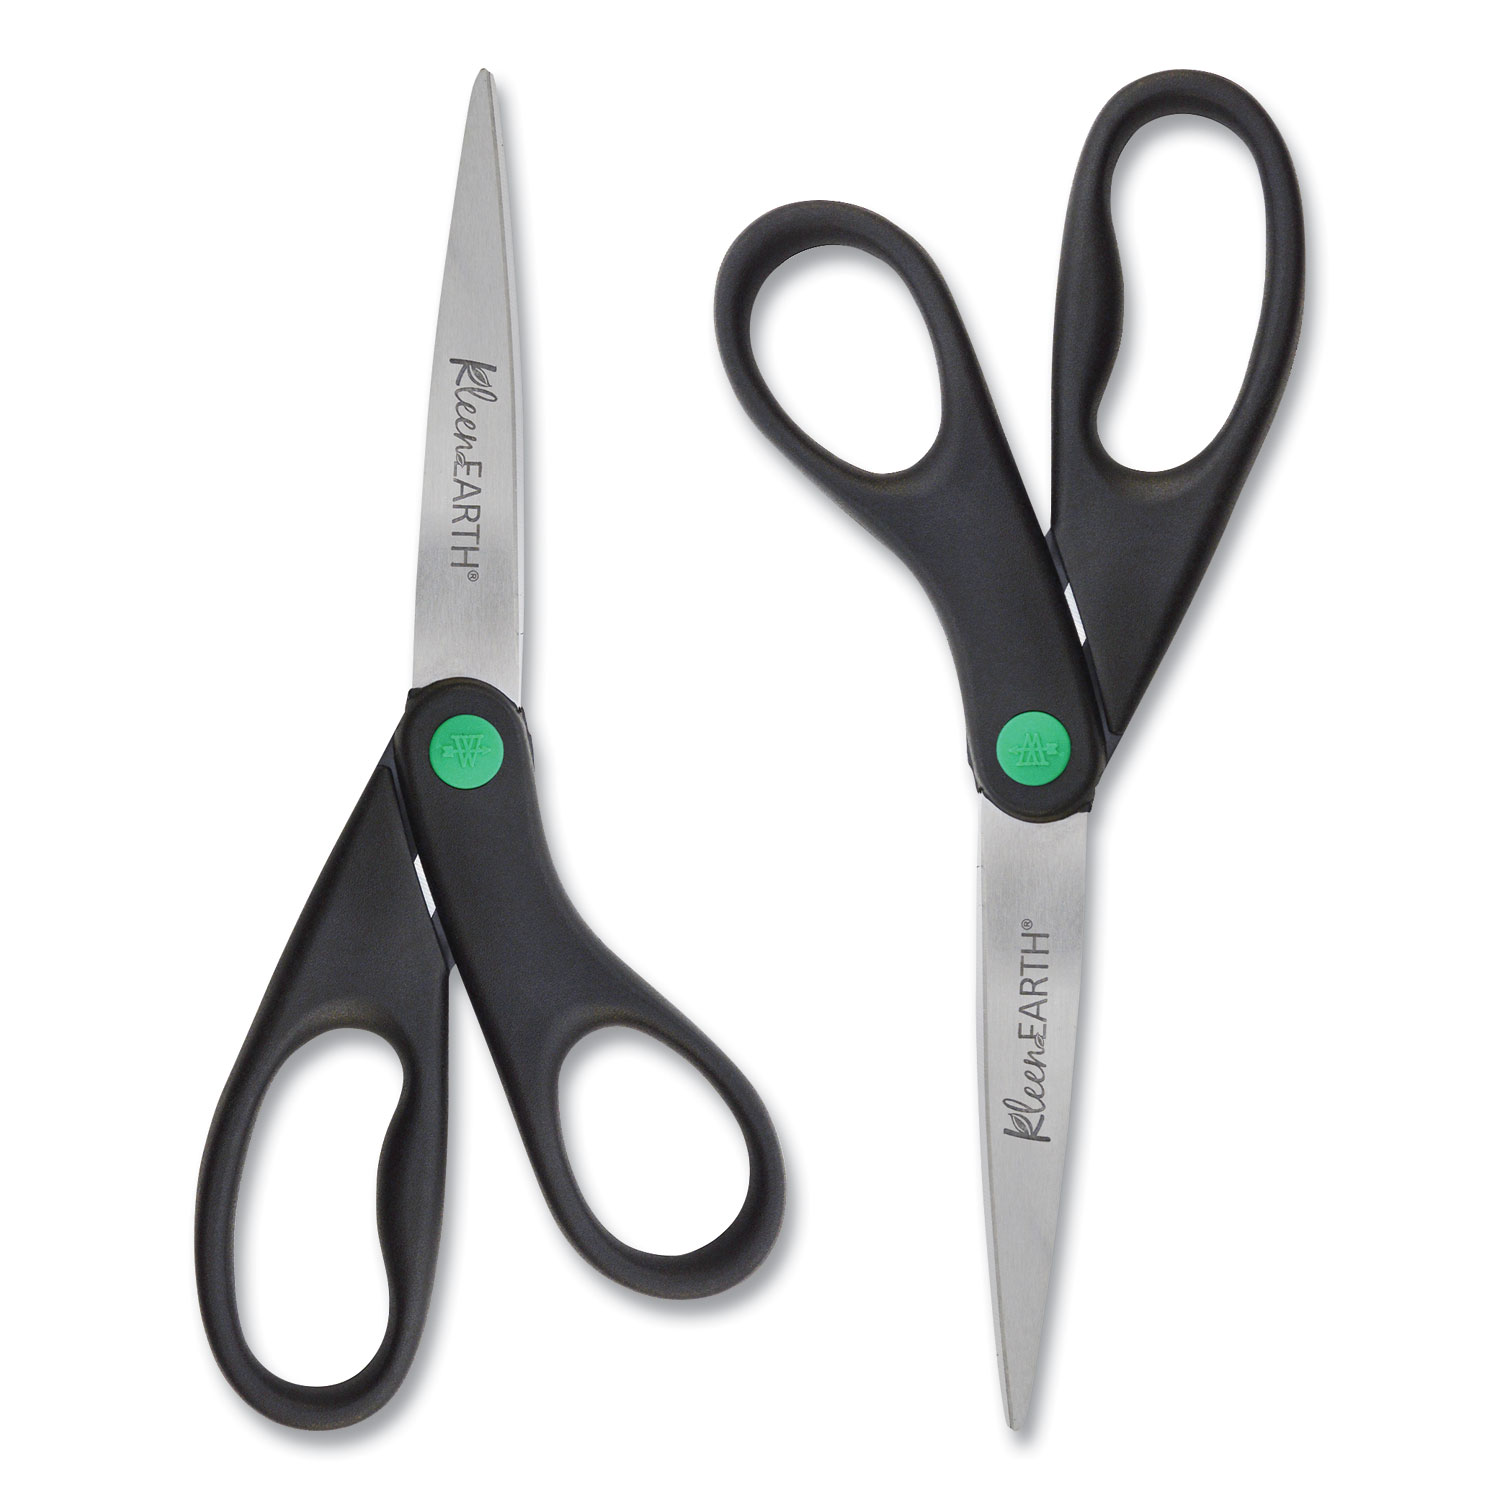 Great Value, Universal® Stainless Steel Office Scissors, 8 Long, 3.75 Cut  Length, Black Straight Handle by UNIVERSAL OFFICE PRODUCTS